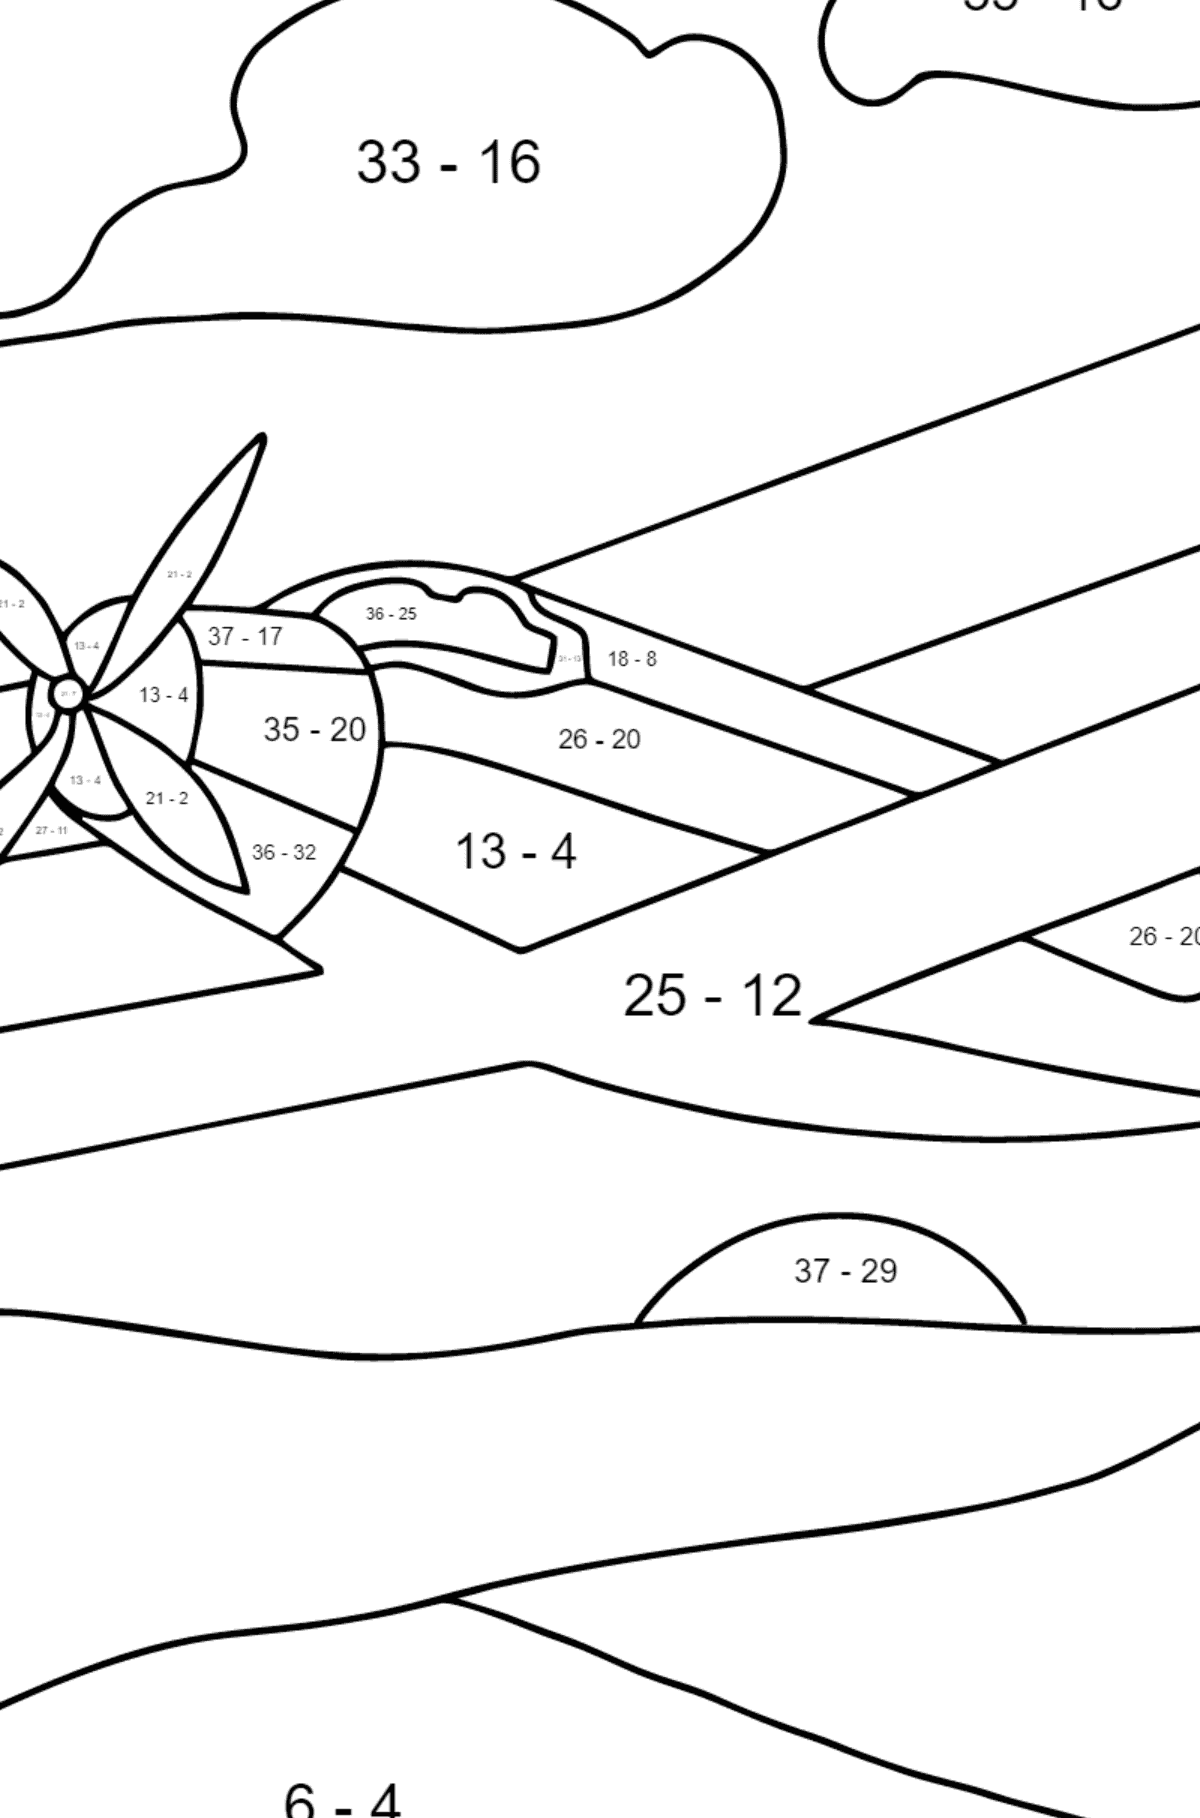 Coloring Page - A Biplane - Math Coloring - Subtraction for Kids